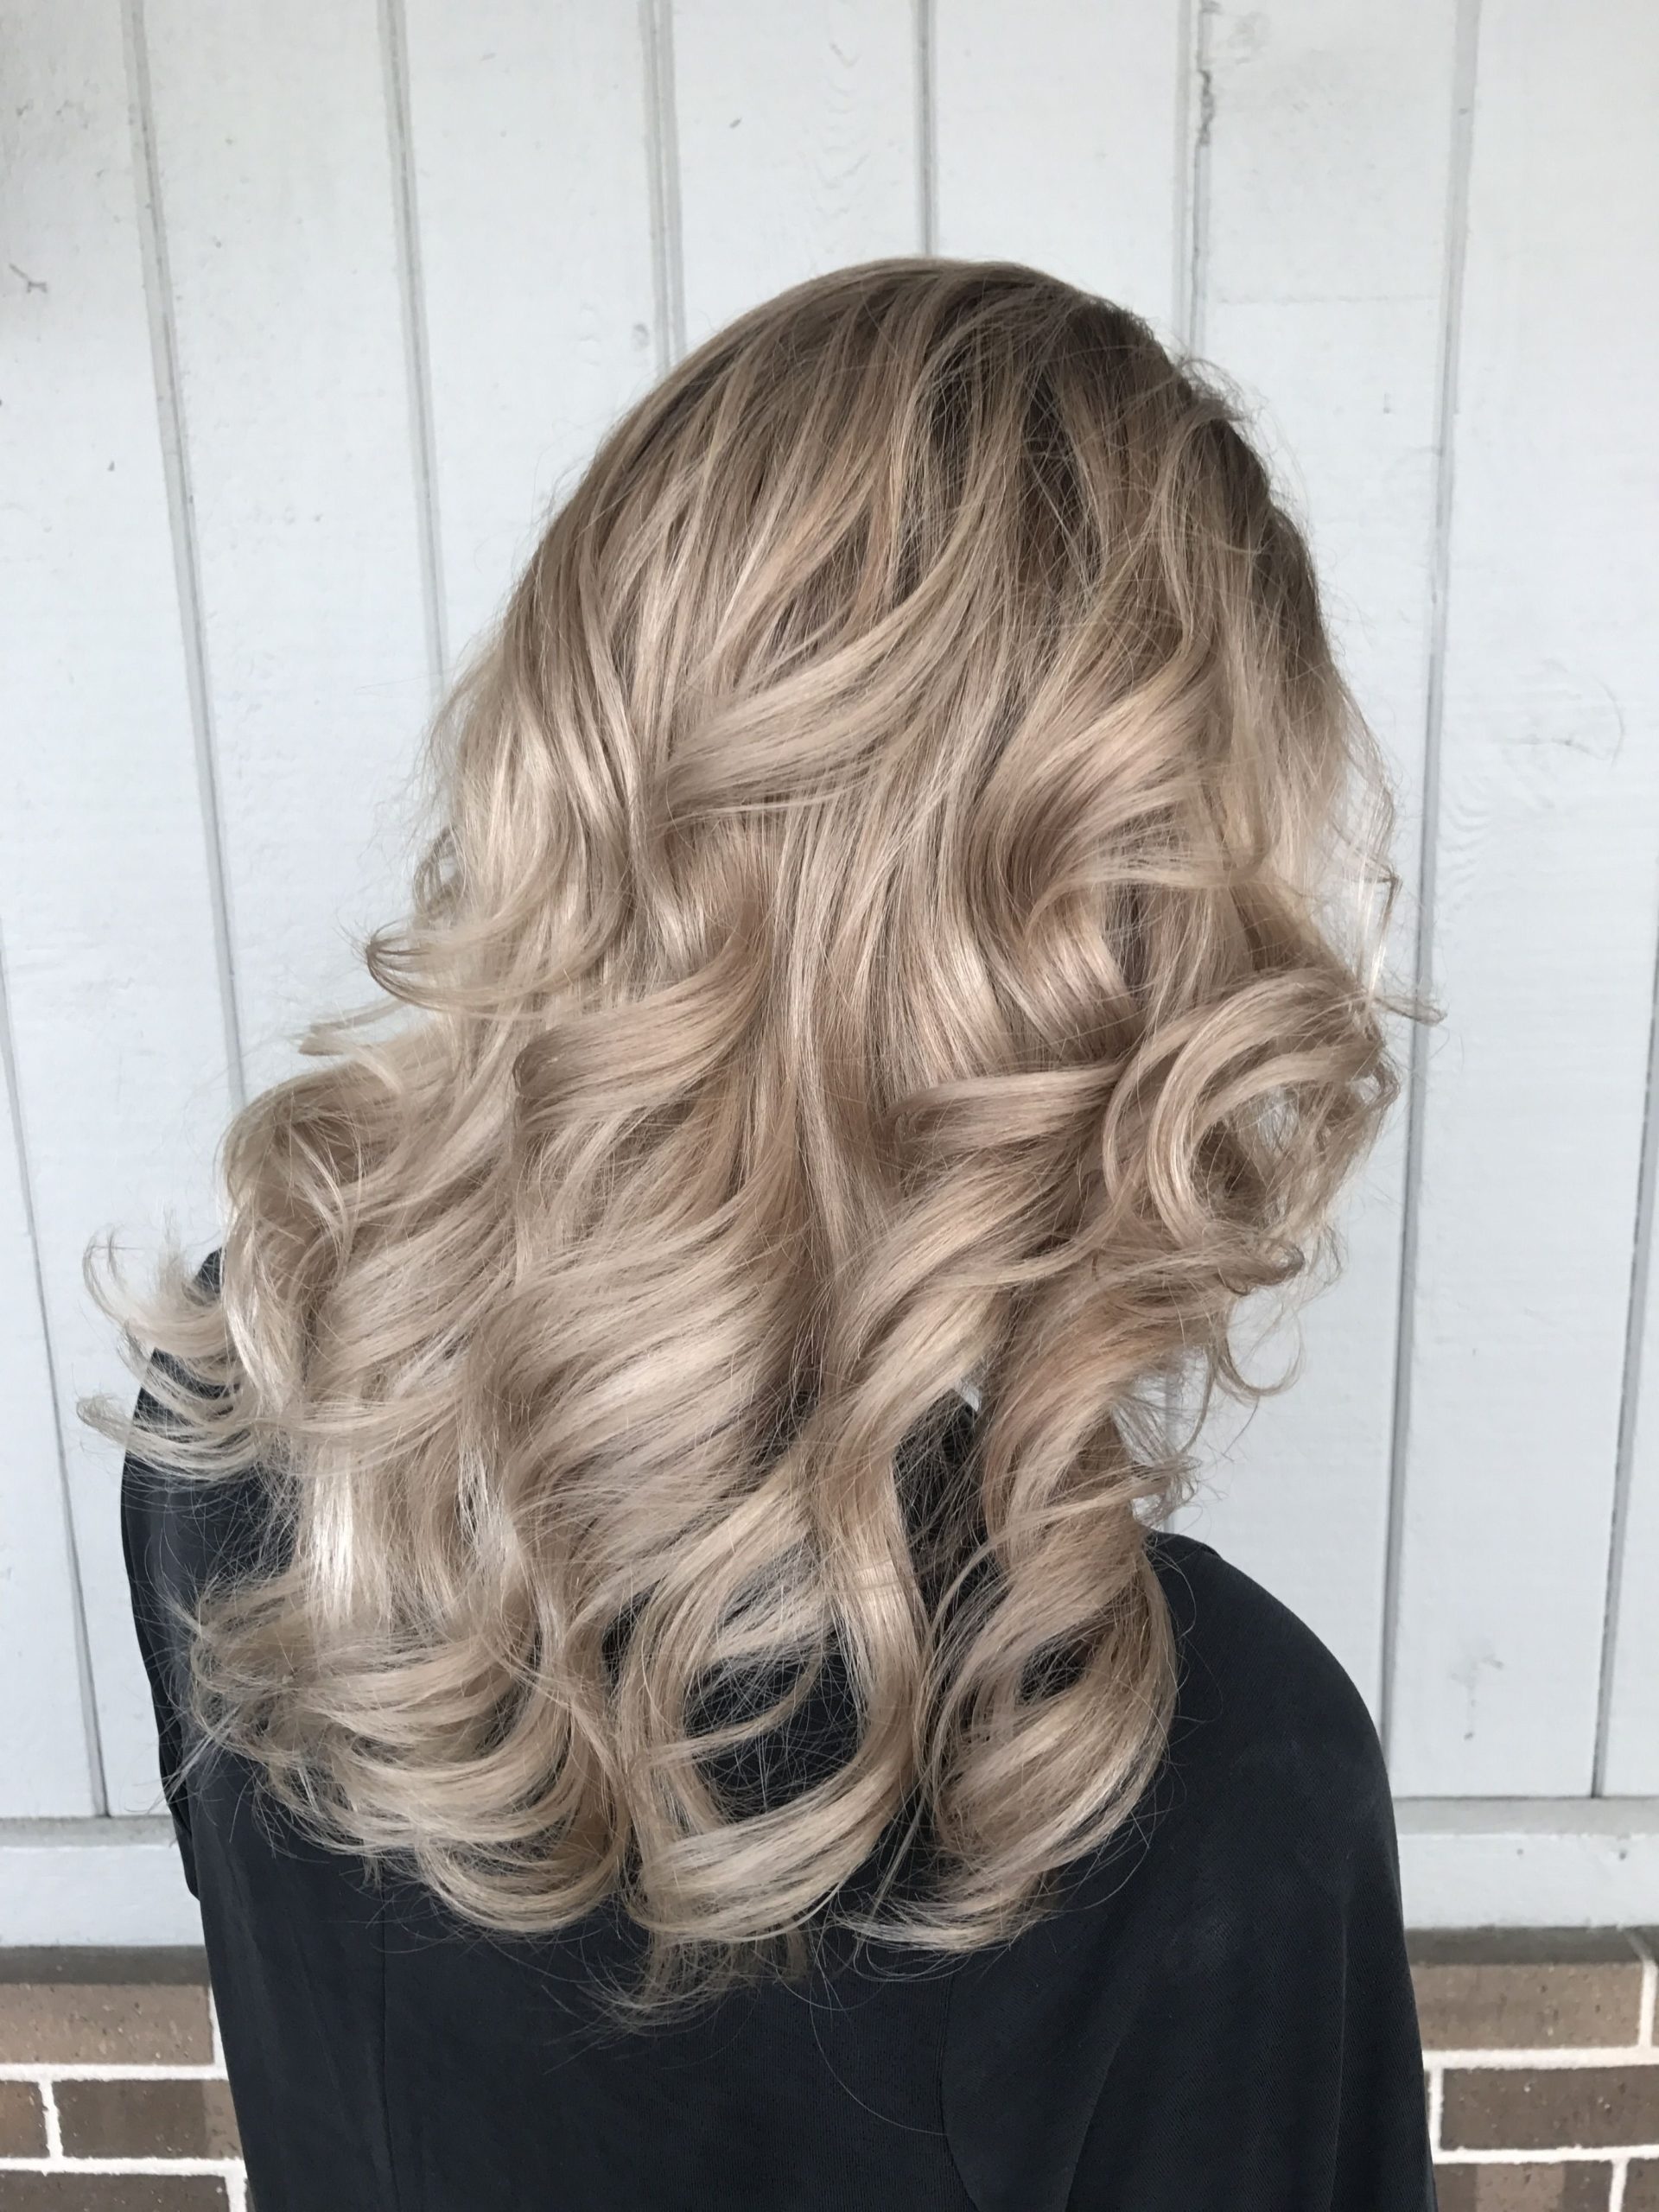 Hairstyle Trends 30 Gorgeous Ash Blonde Balayage Hair Color Ideas To Copy Photos Collection 